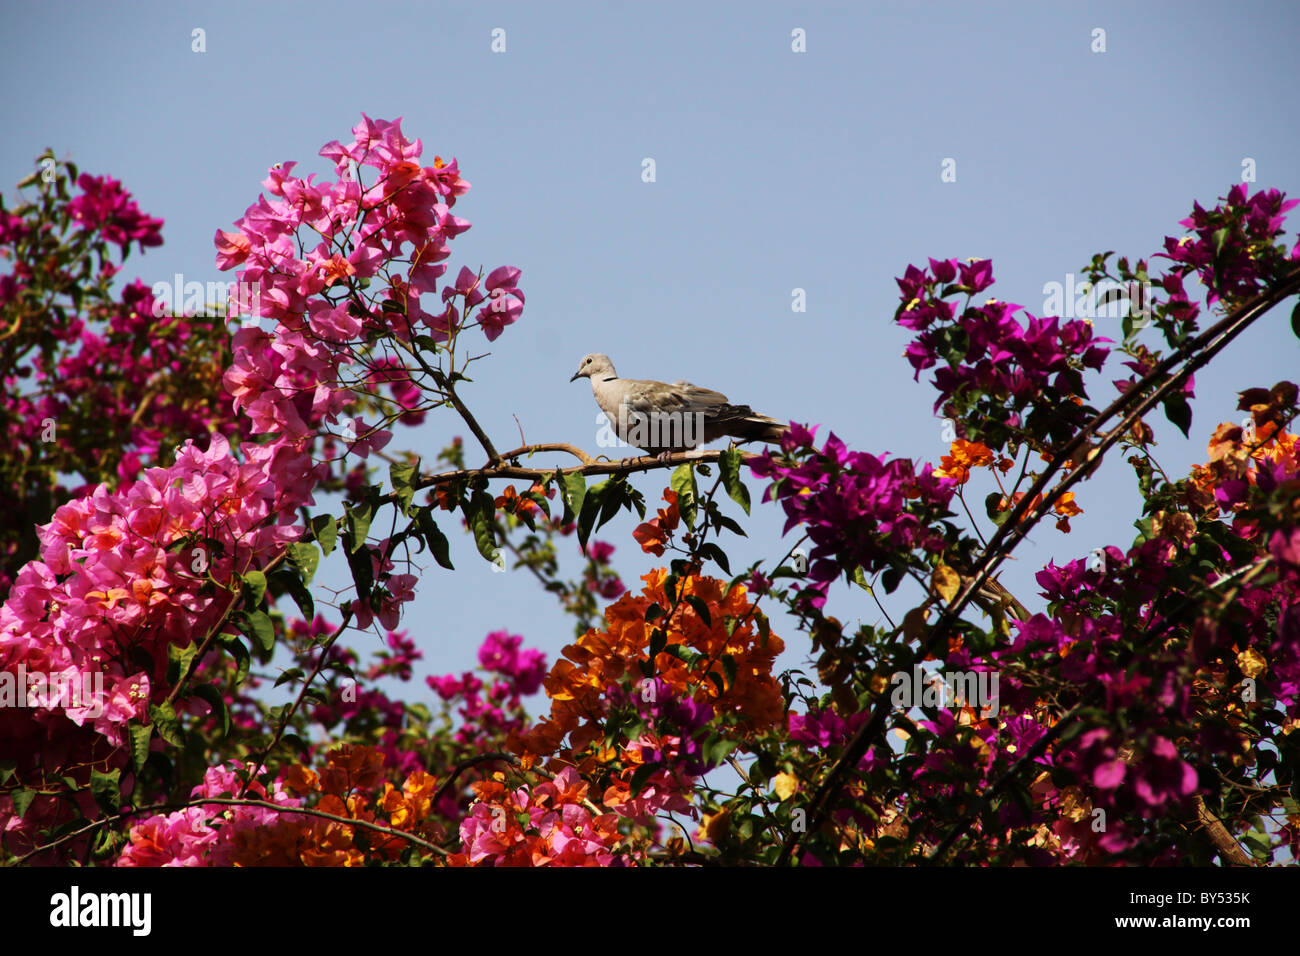 Dove on branch with purple blooms against blue sky Stock Photo